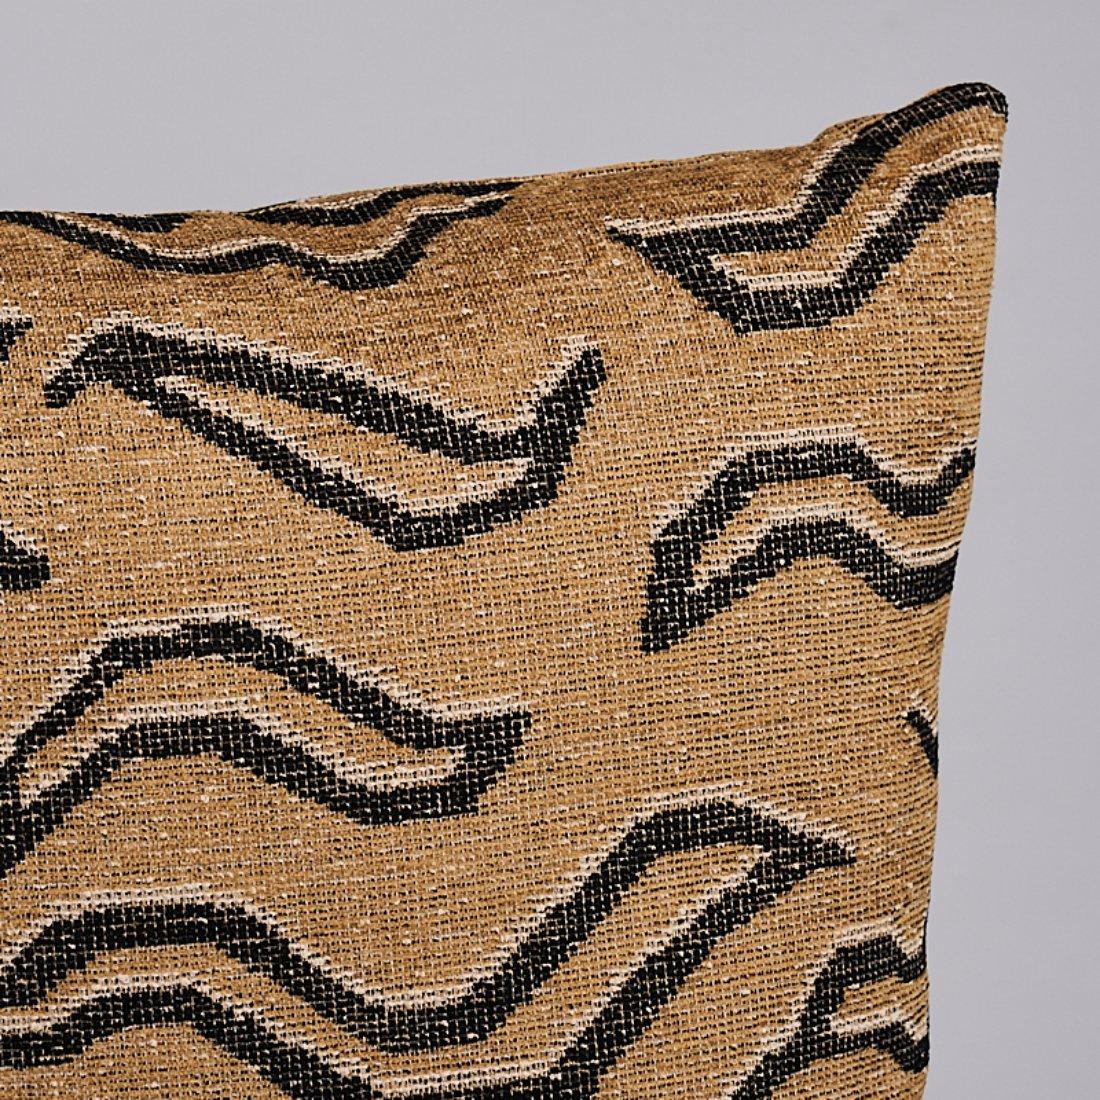 This pillow features Kata with a knife edge finish. An abstract take on a Tibetan tiger pattern, denim-colored Kata is a fabulous, upholstery weight, flat weave fabric with a little chenille for a soft touch. It is a mid-scale, allover pattern with